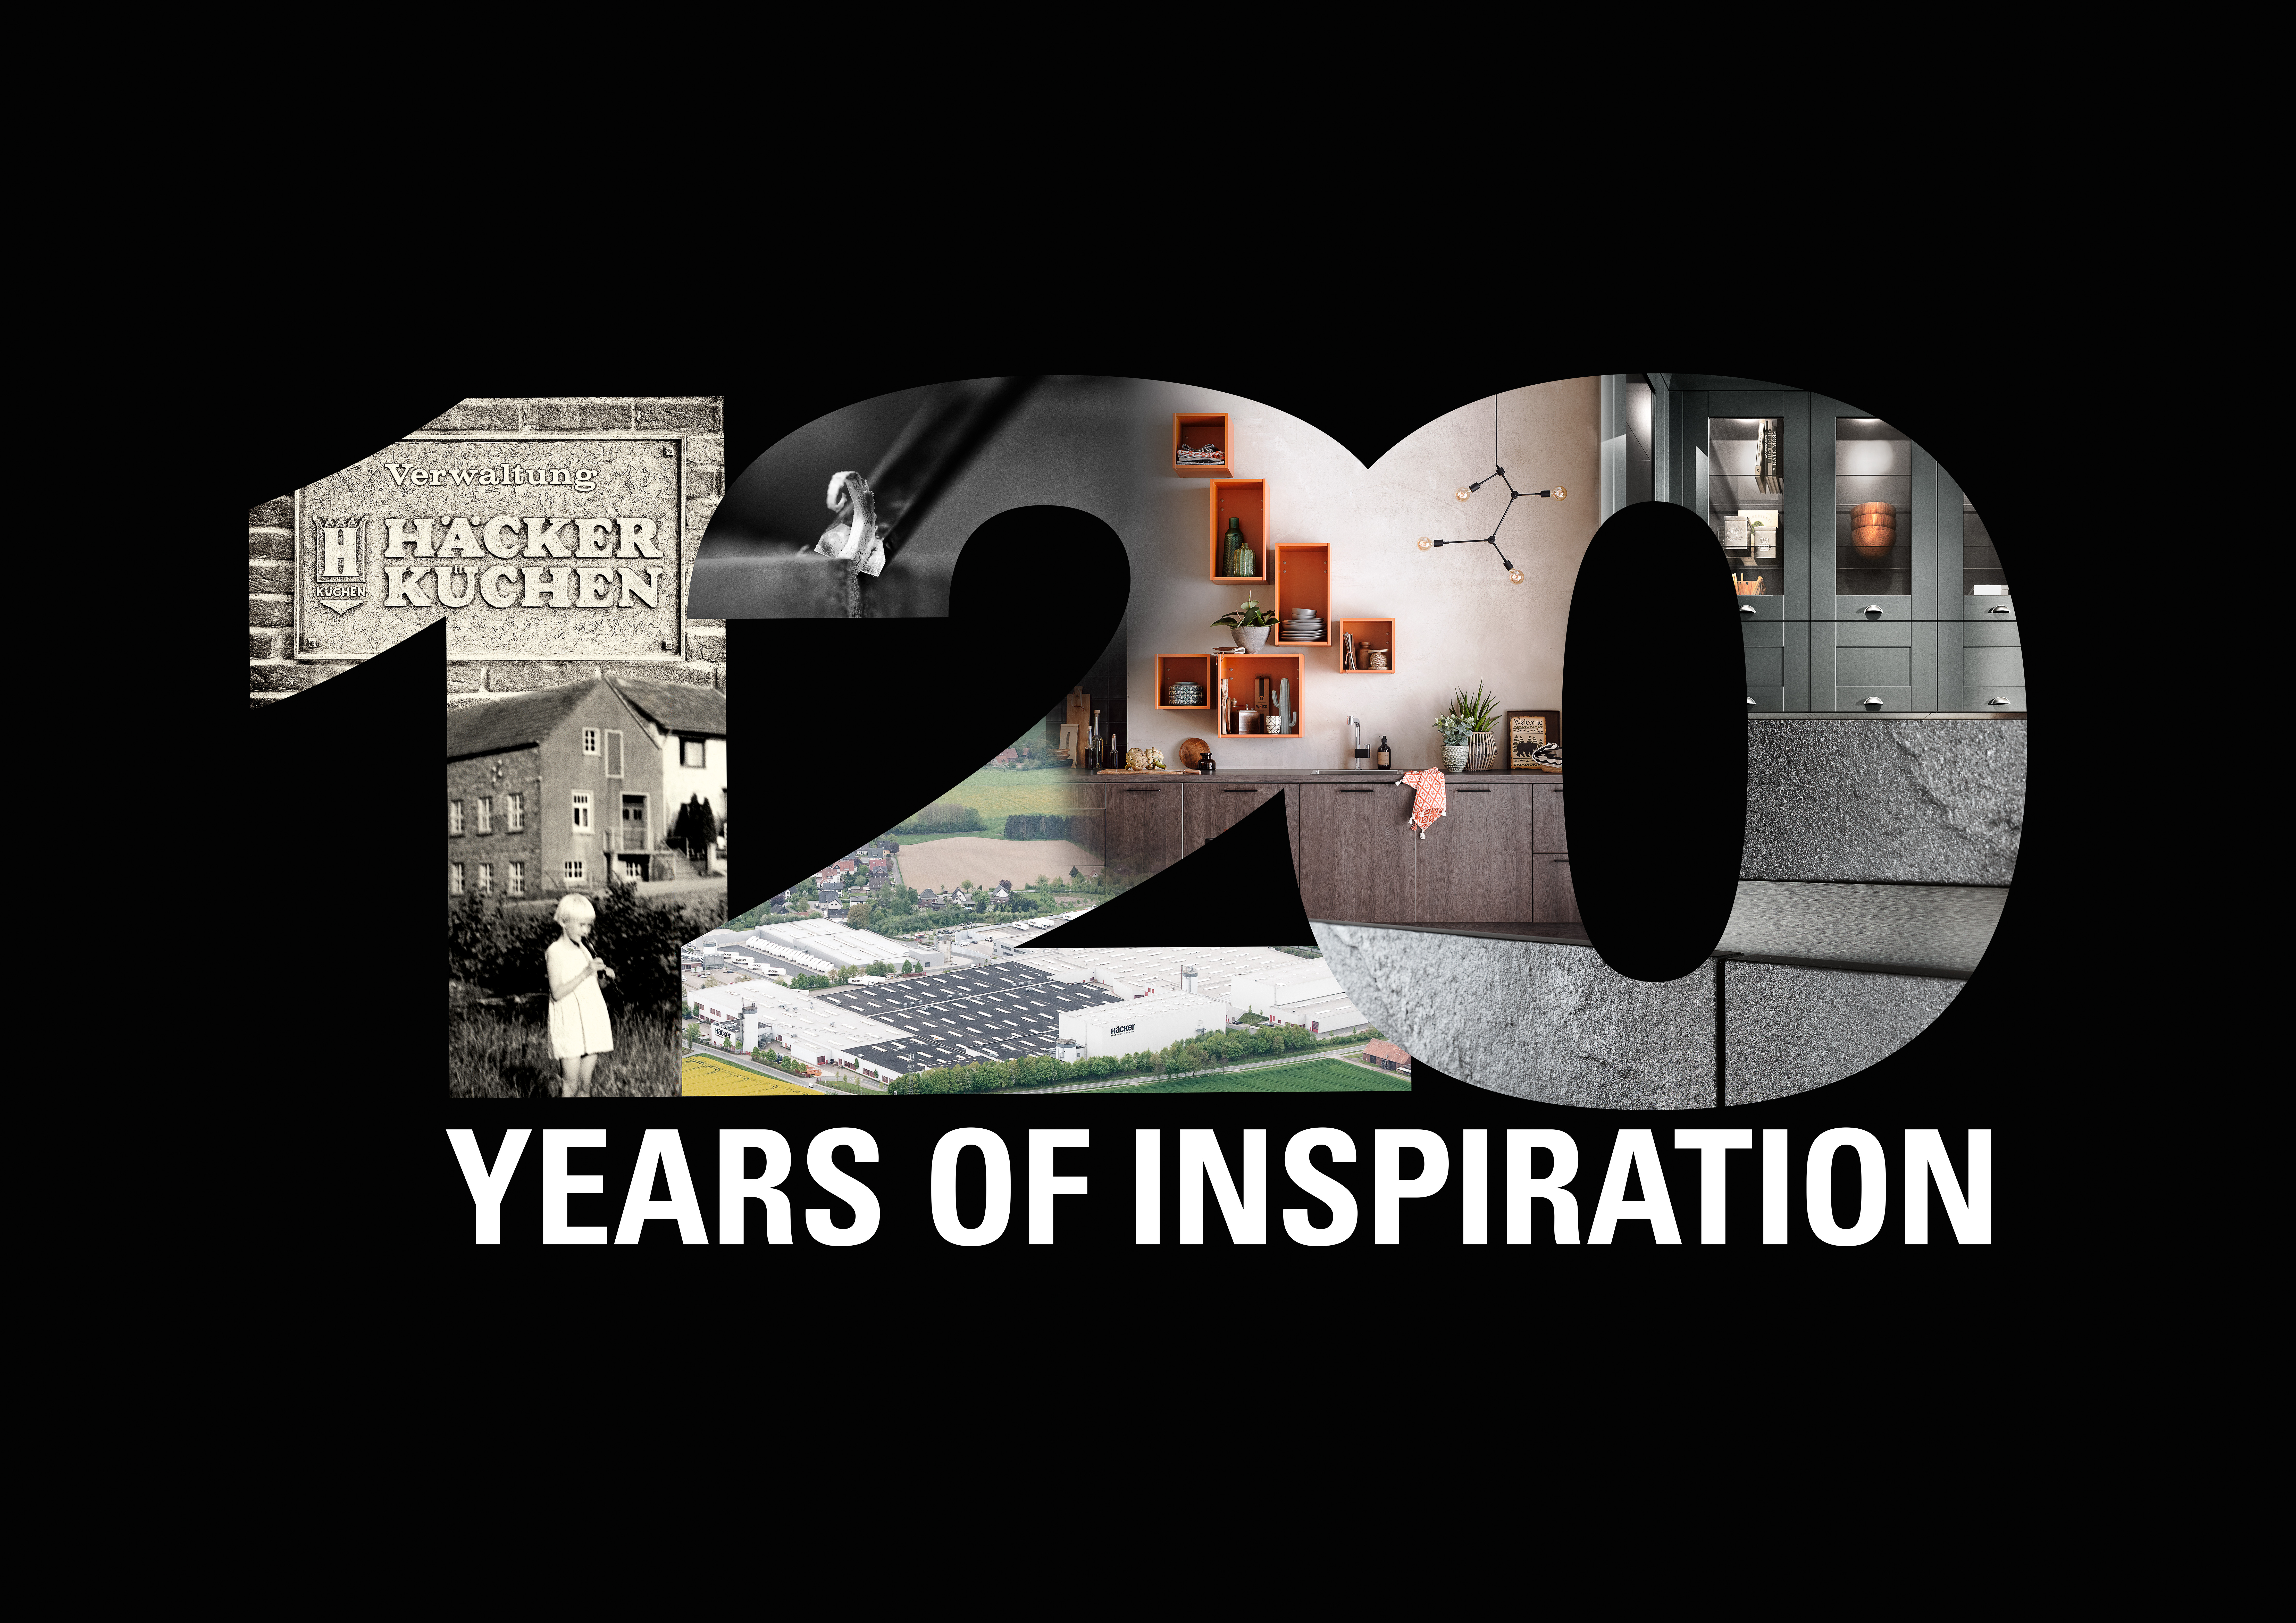 120 years of inspiration